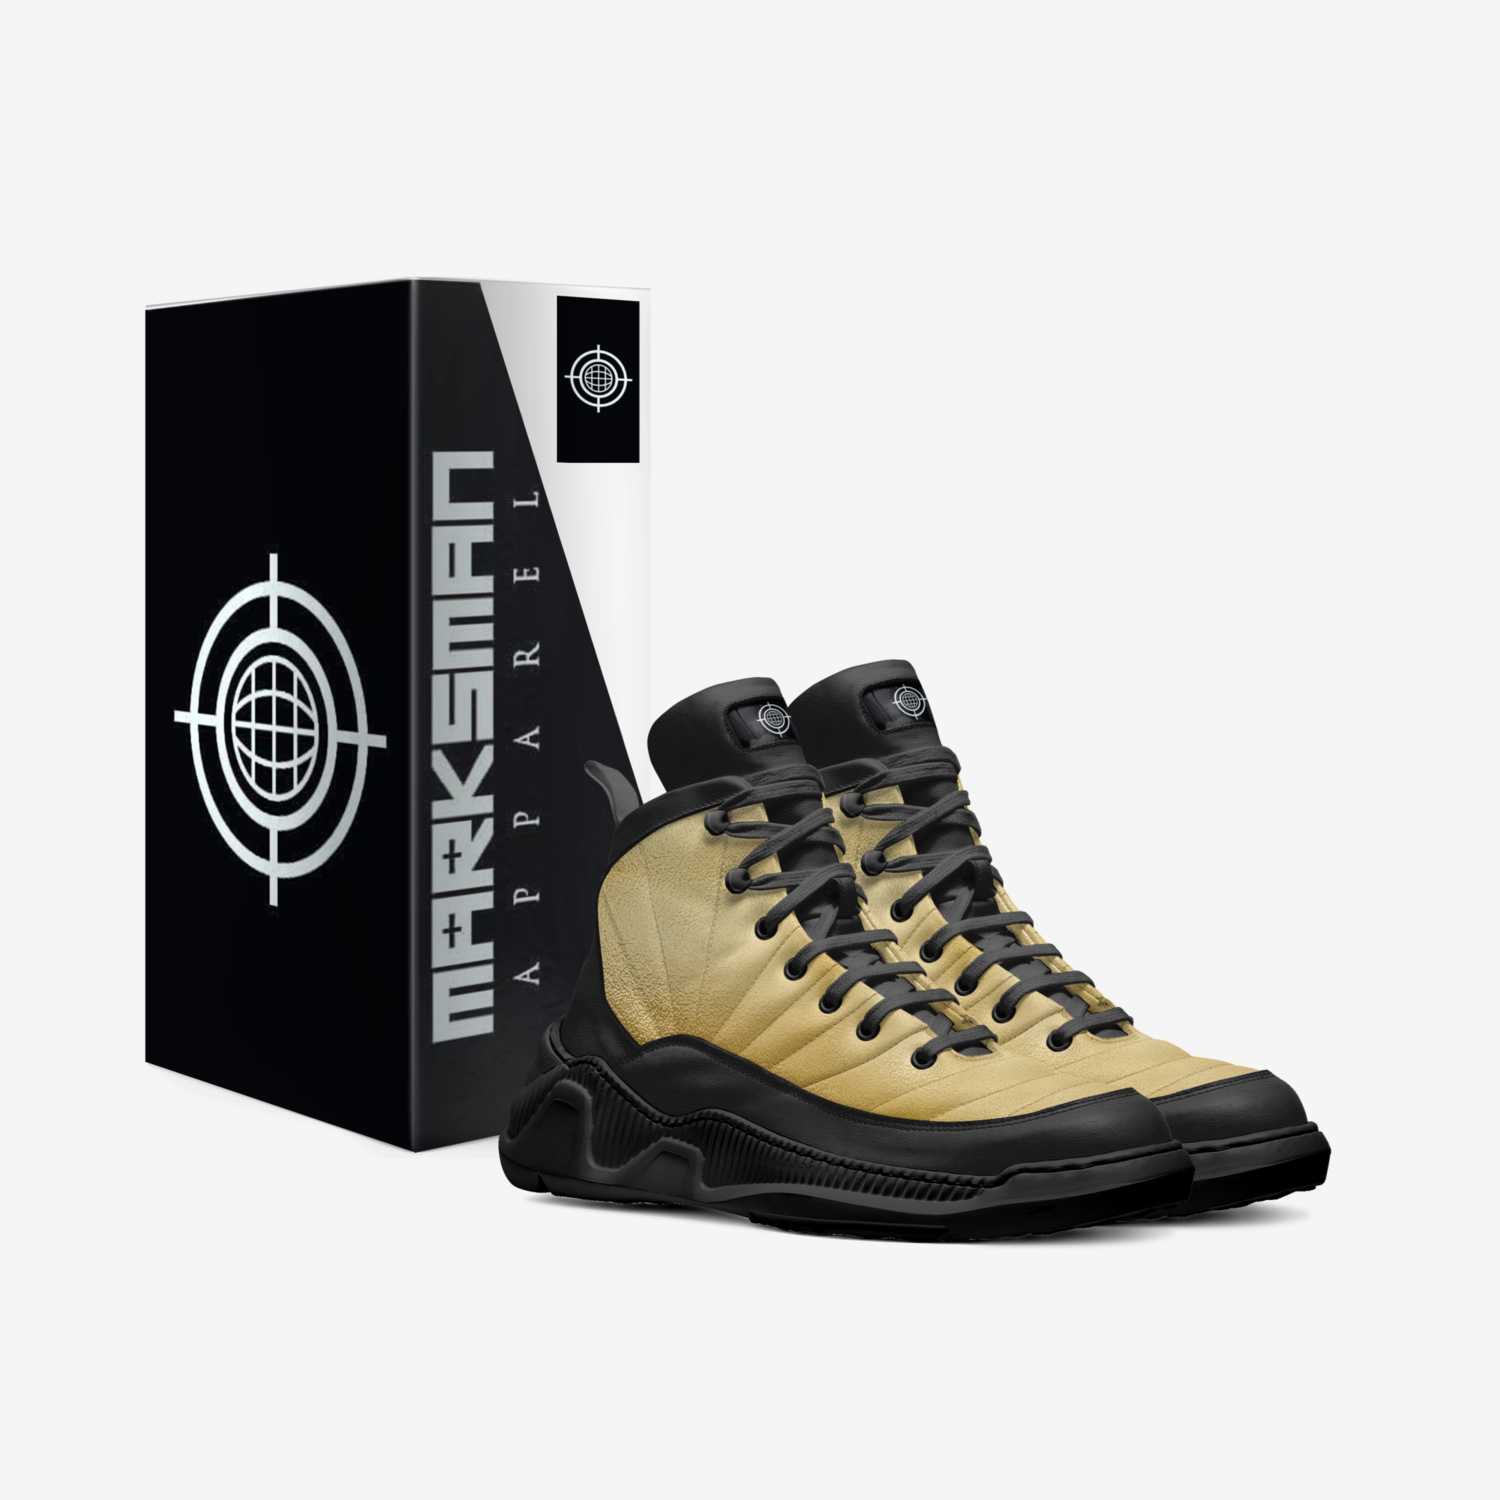 Goldmine custom made in Italy shoes by Marksman Apparel | Box view